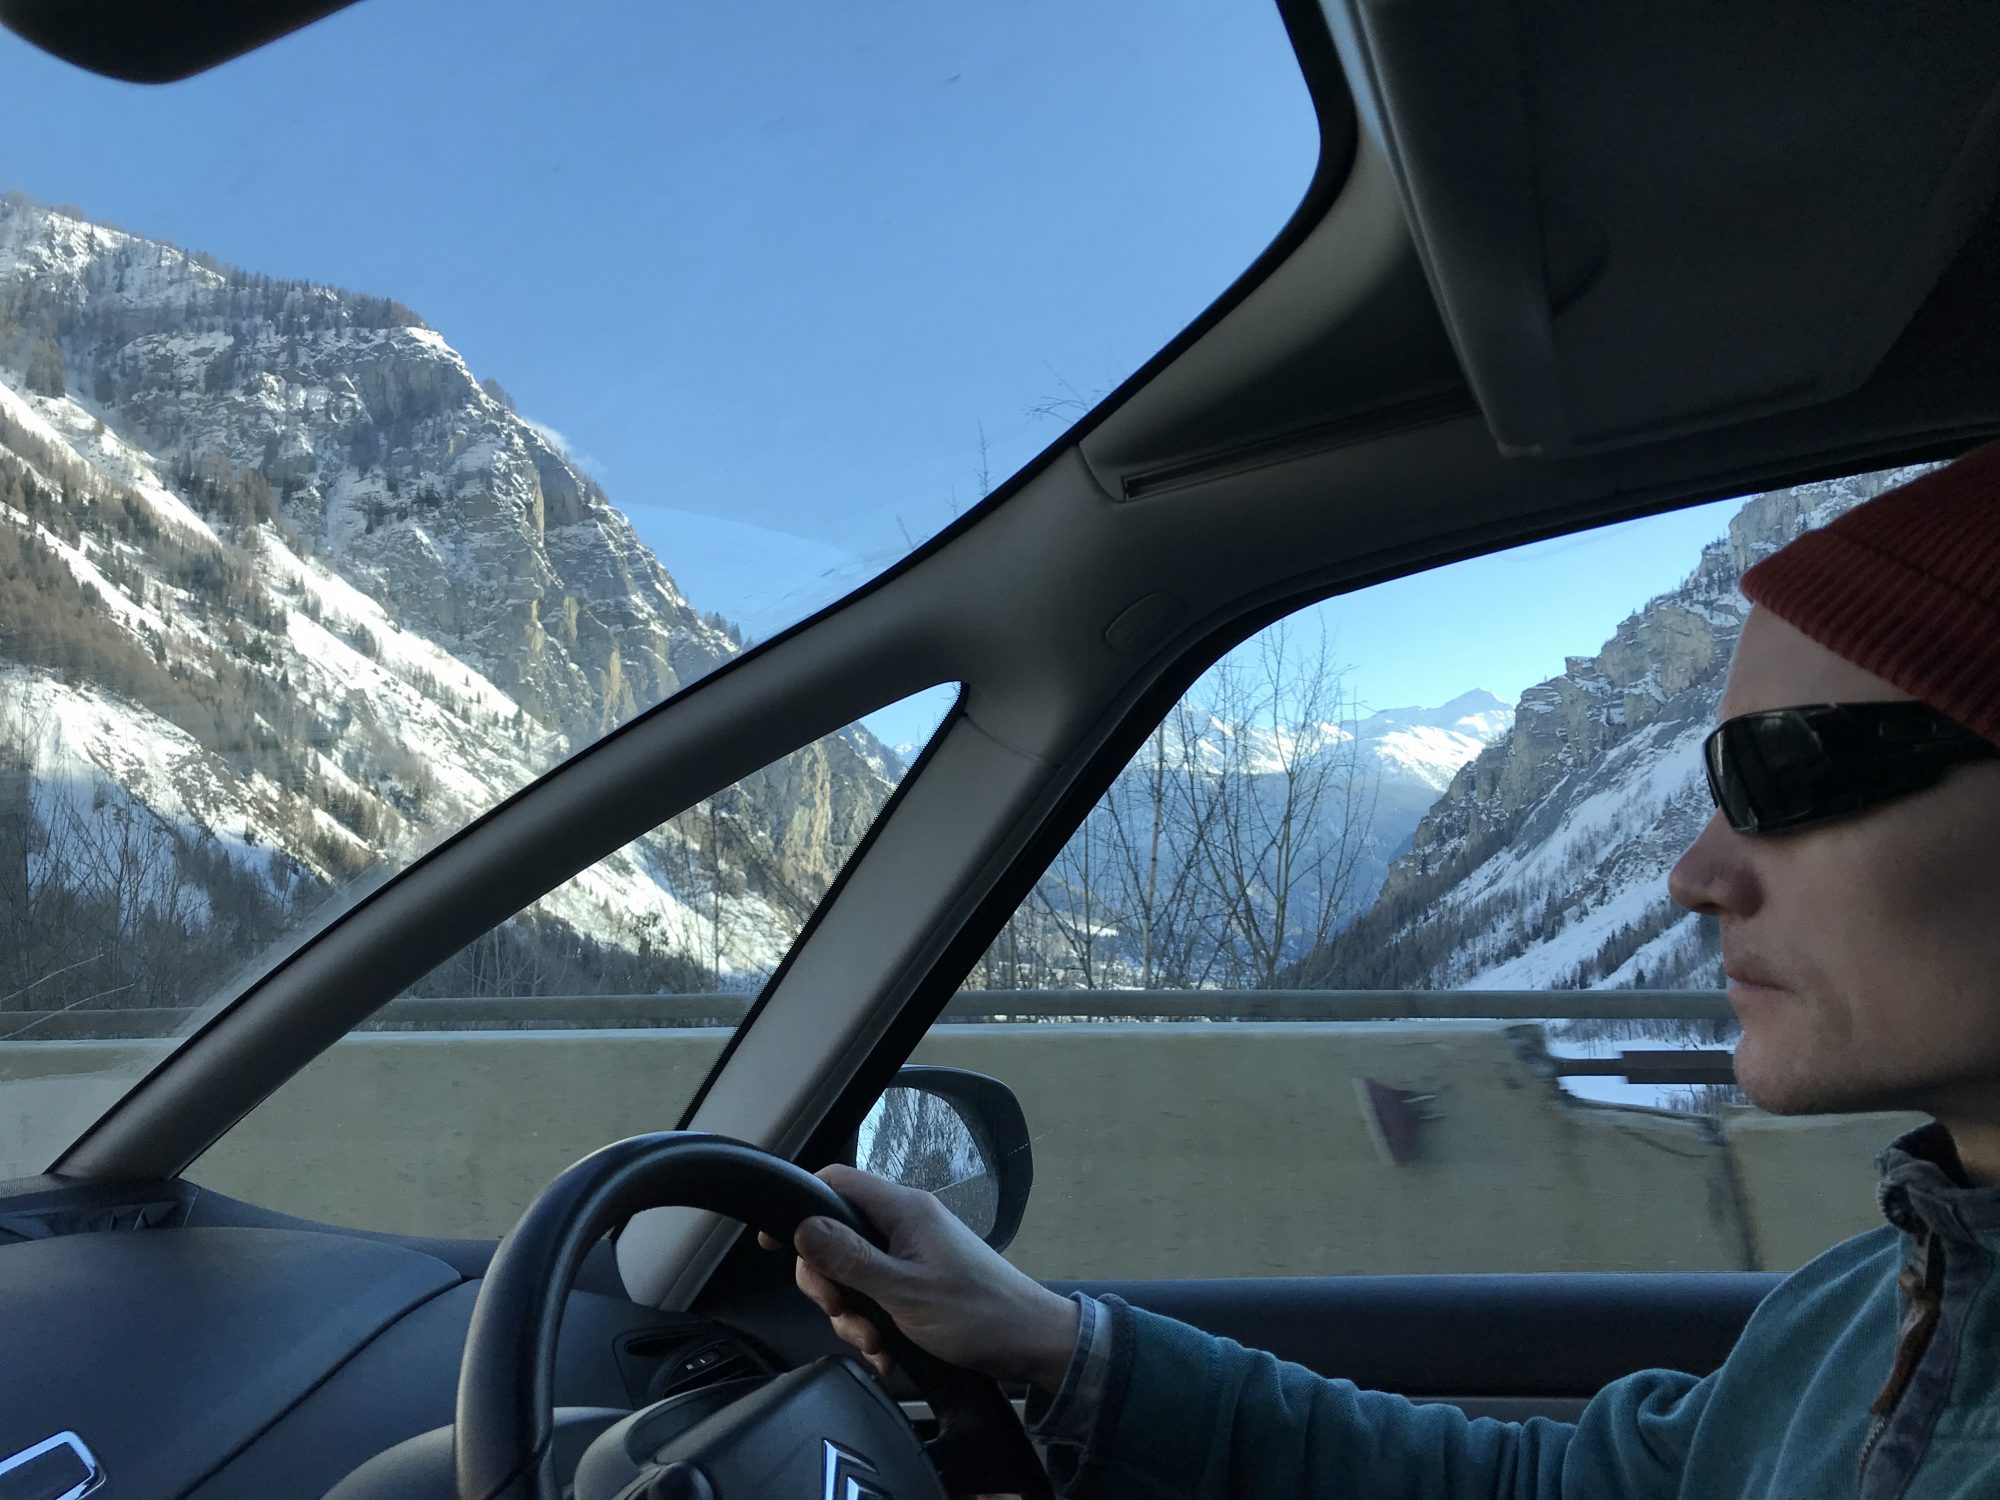 As soon as we've passed the Mont Blanc Tunnel, we were greeted with sun in Courmayeur. Photo by The-Ski-Guru.